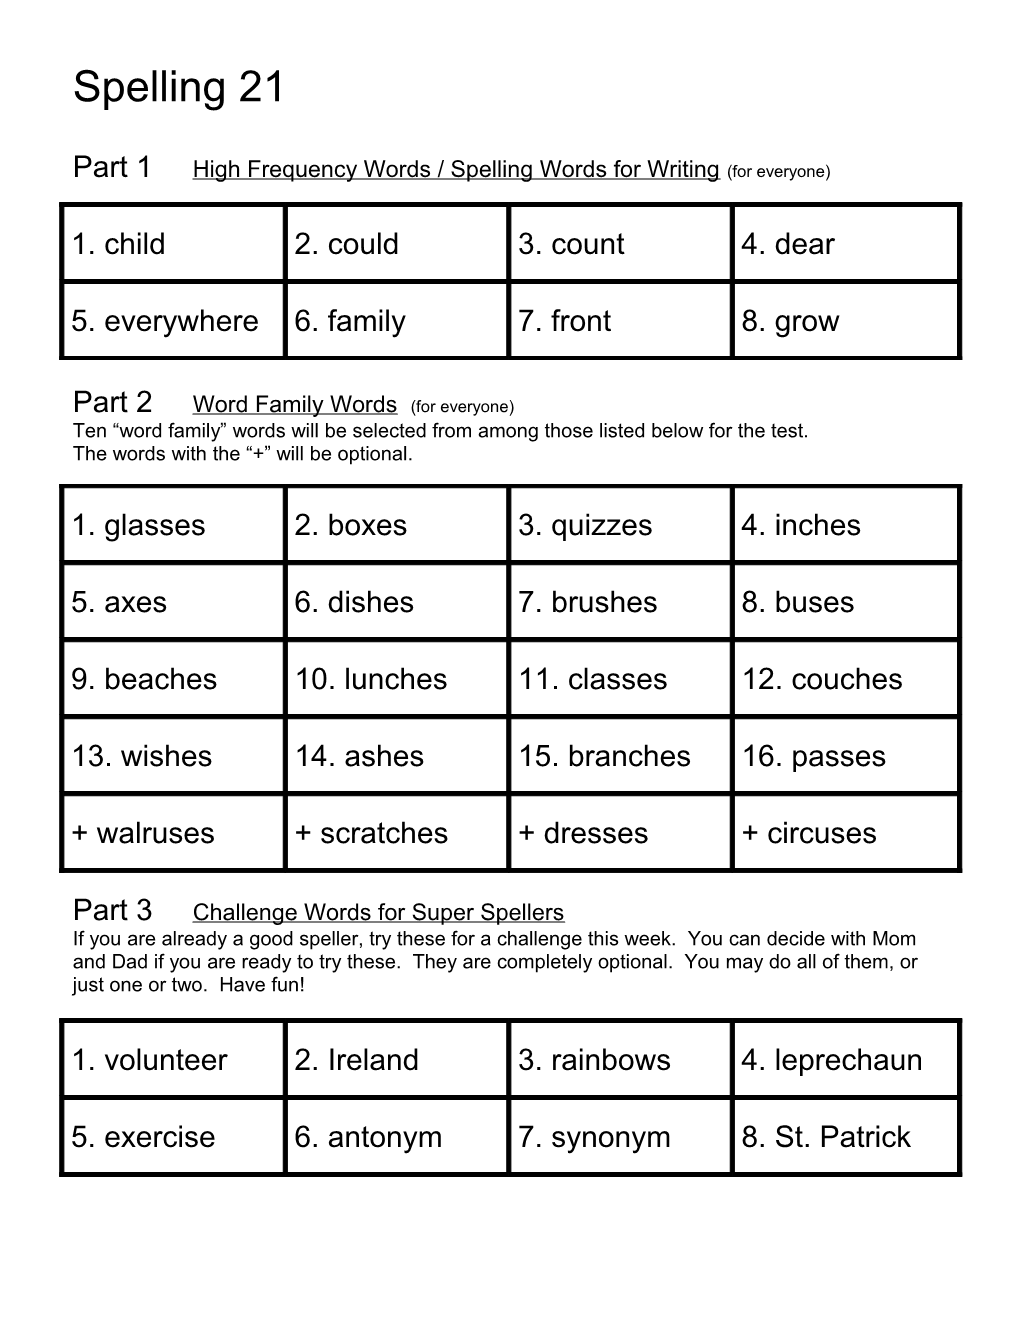 Part 1 High Frequency Words / Spelling Words for Writing (For Everyone)